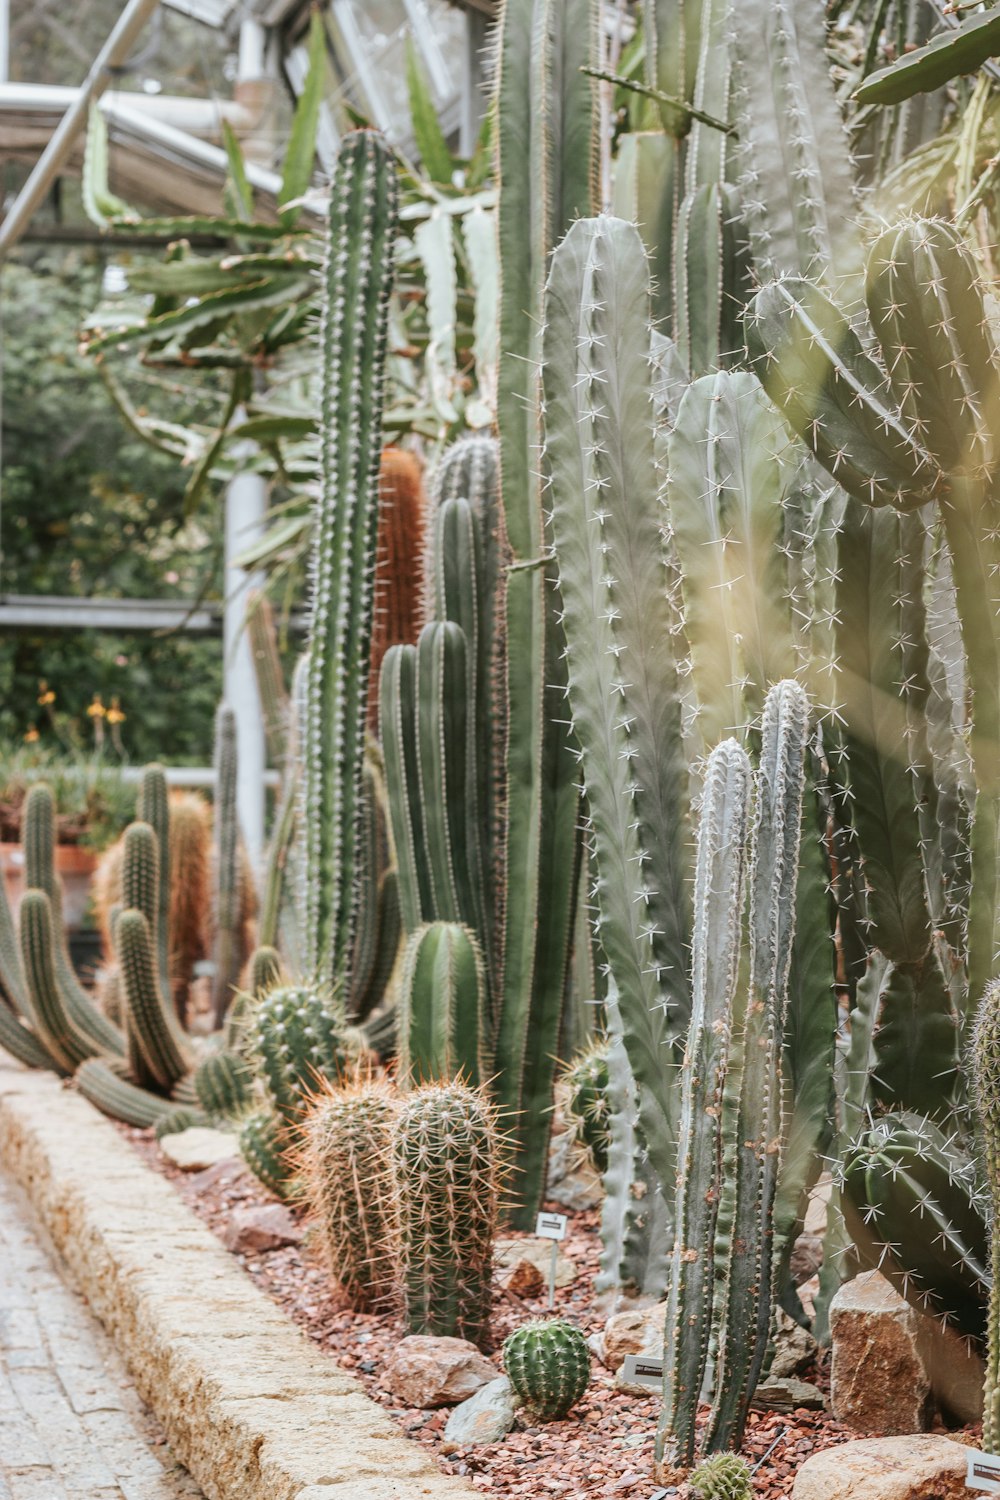 green cactus plants during daytime